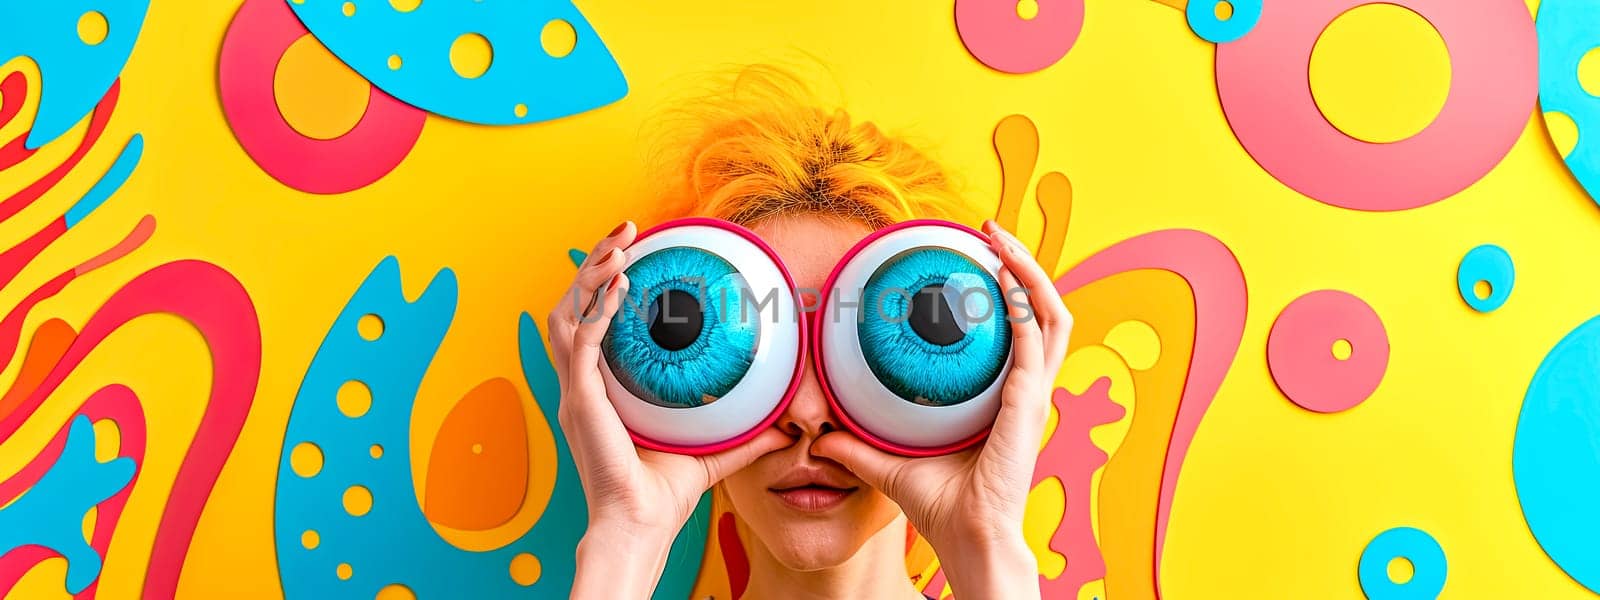 Surreal Eyeball Props with Vibrant Pop Art on Yellow Background - Quirky and Artistic Imagery by Edophoto